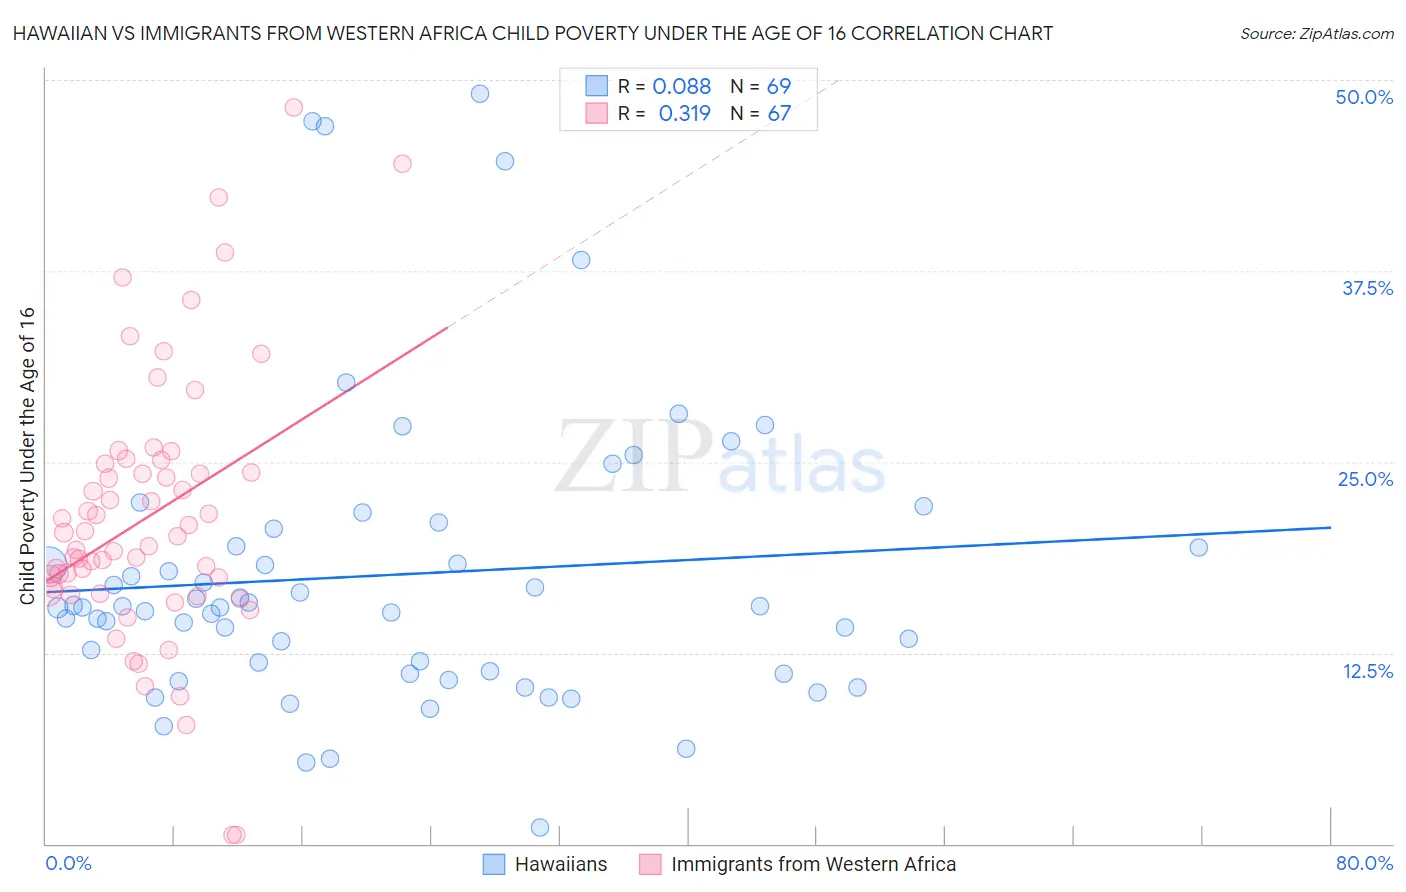 Hawaiian vs Immigrants from Western Africa Child Poverty Under the Age of 16